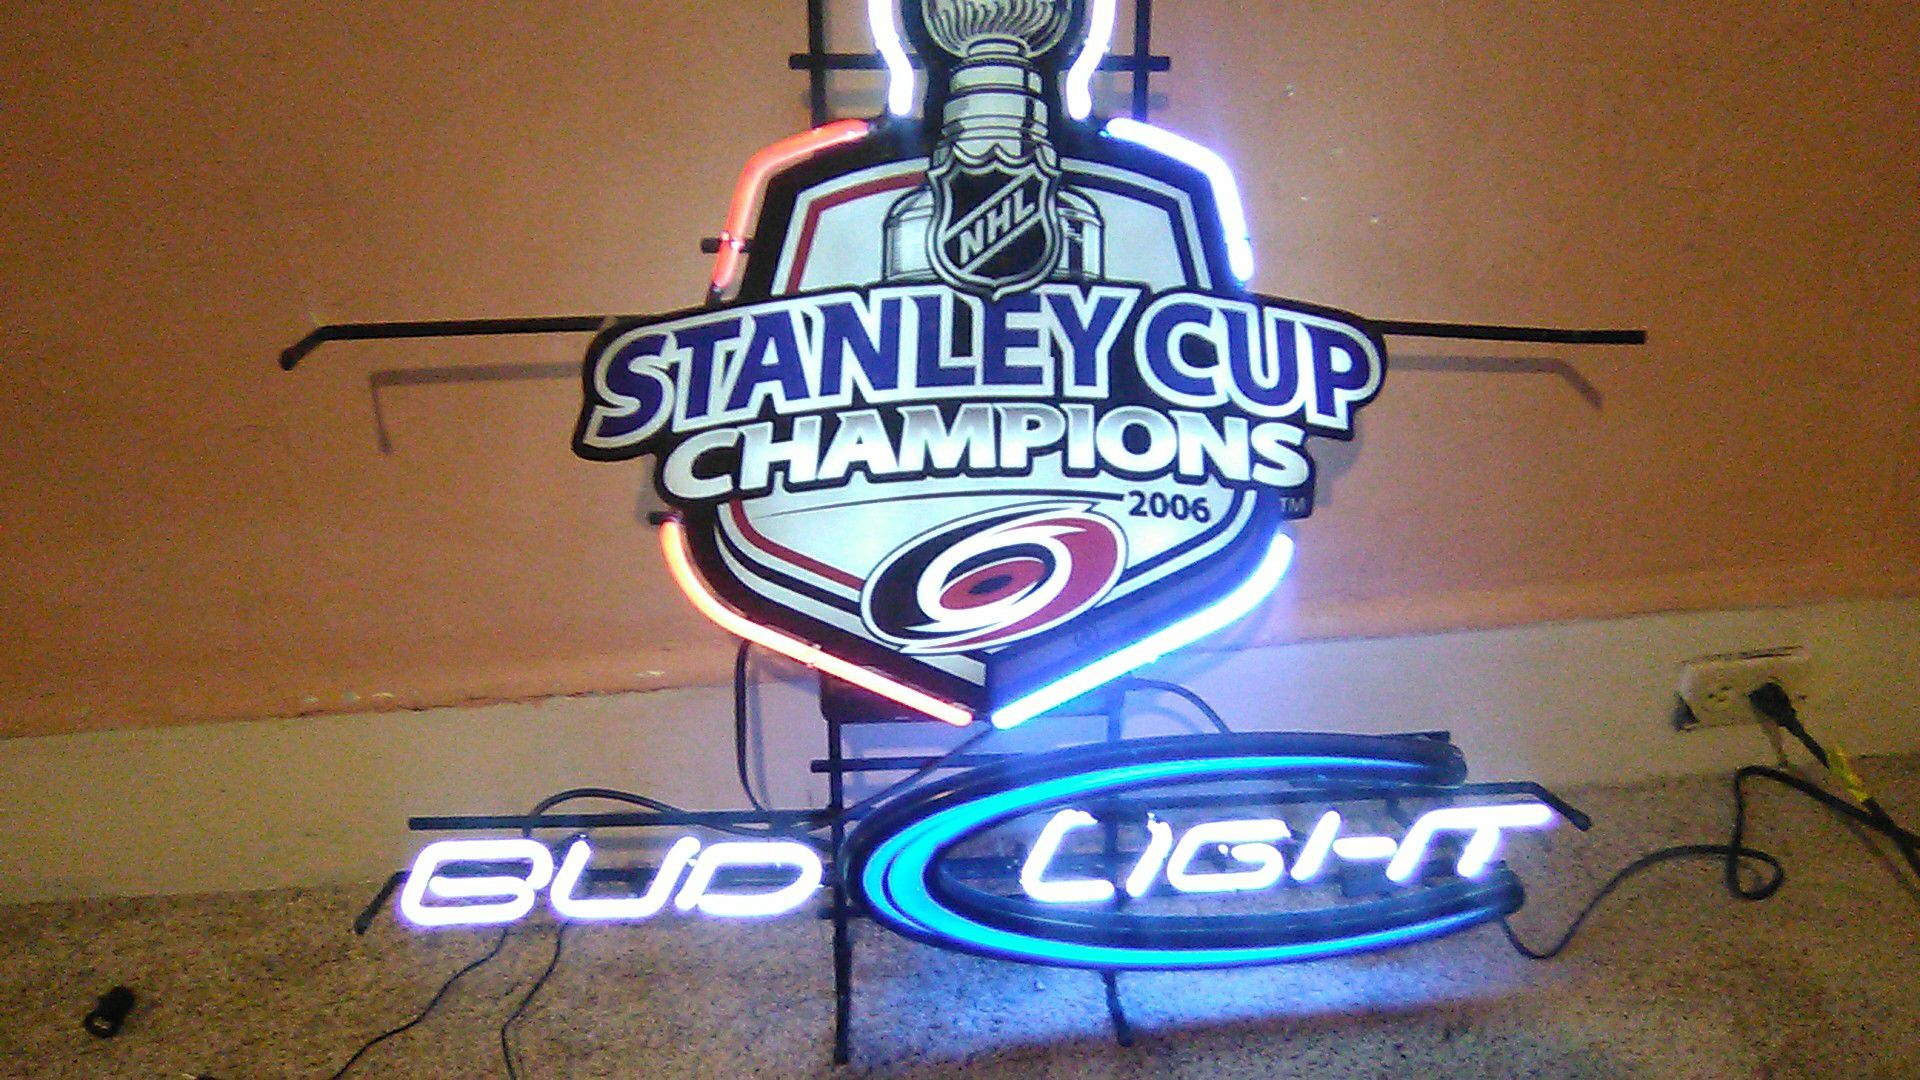 Stanley cup champions 2006 Bud light neon light for Sale in Fuquay-Varina,  NC - OfferUp